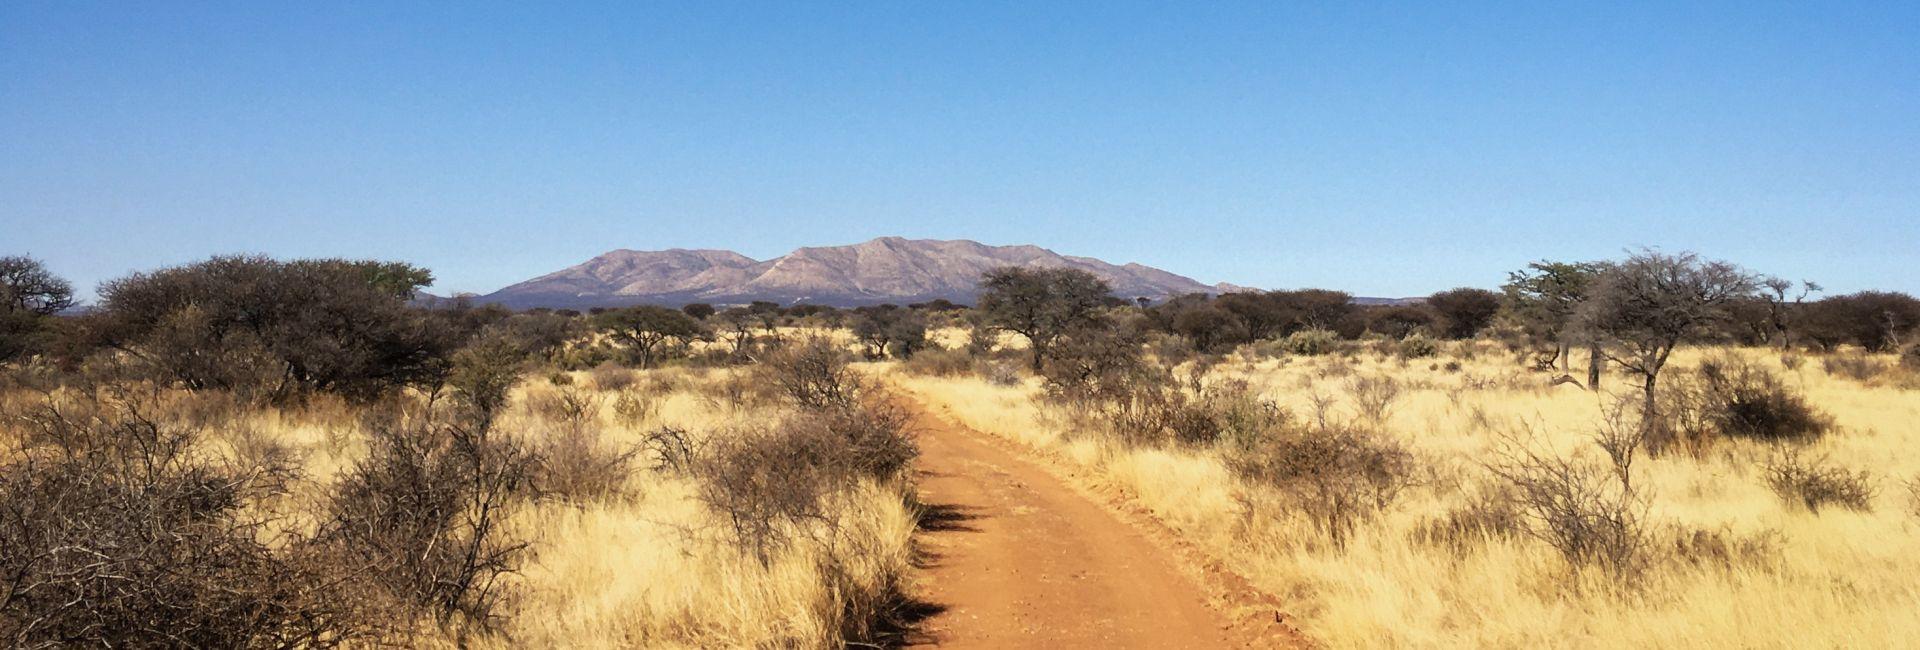 Florian's Review of the Namibia Wildlife Sanctuary!